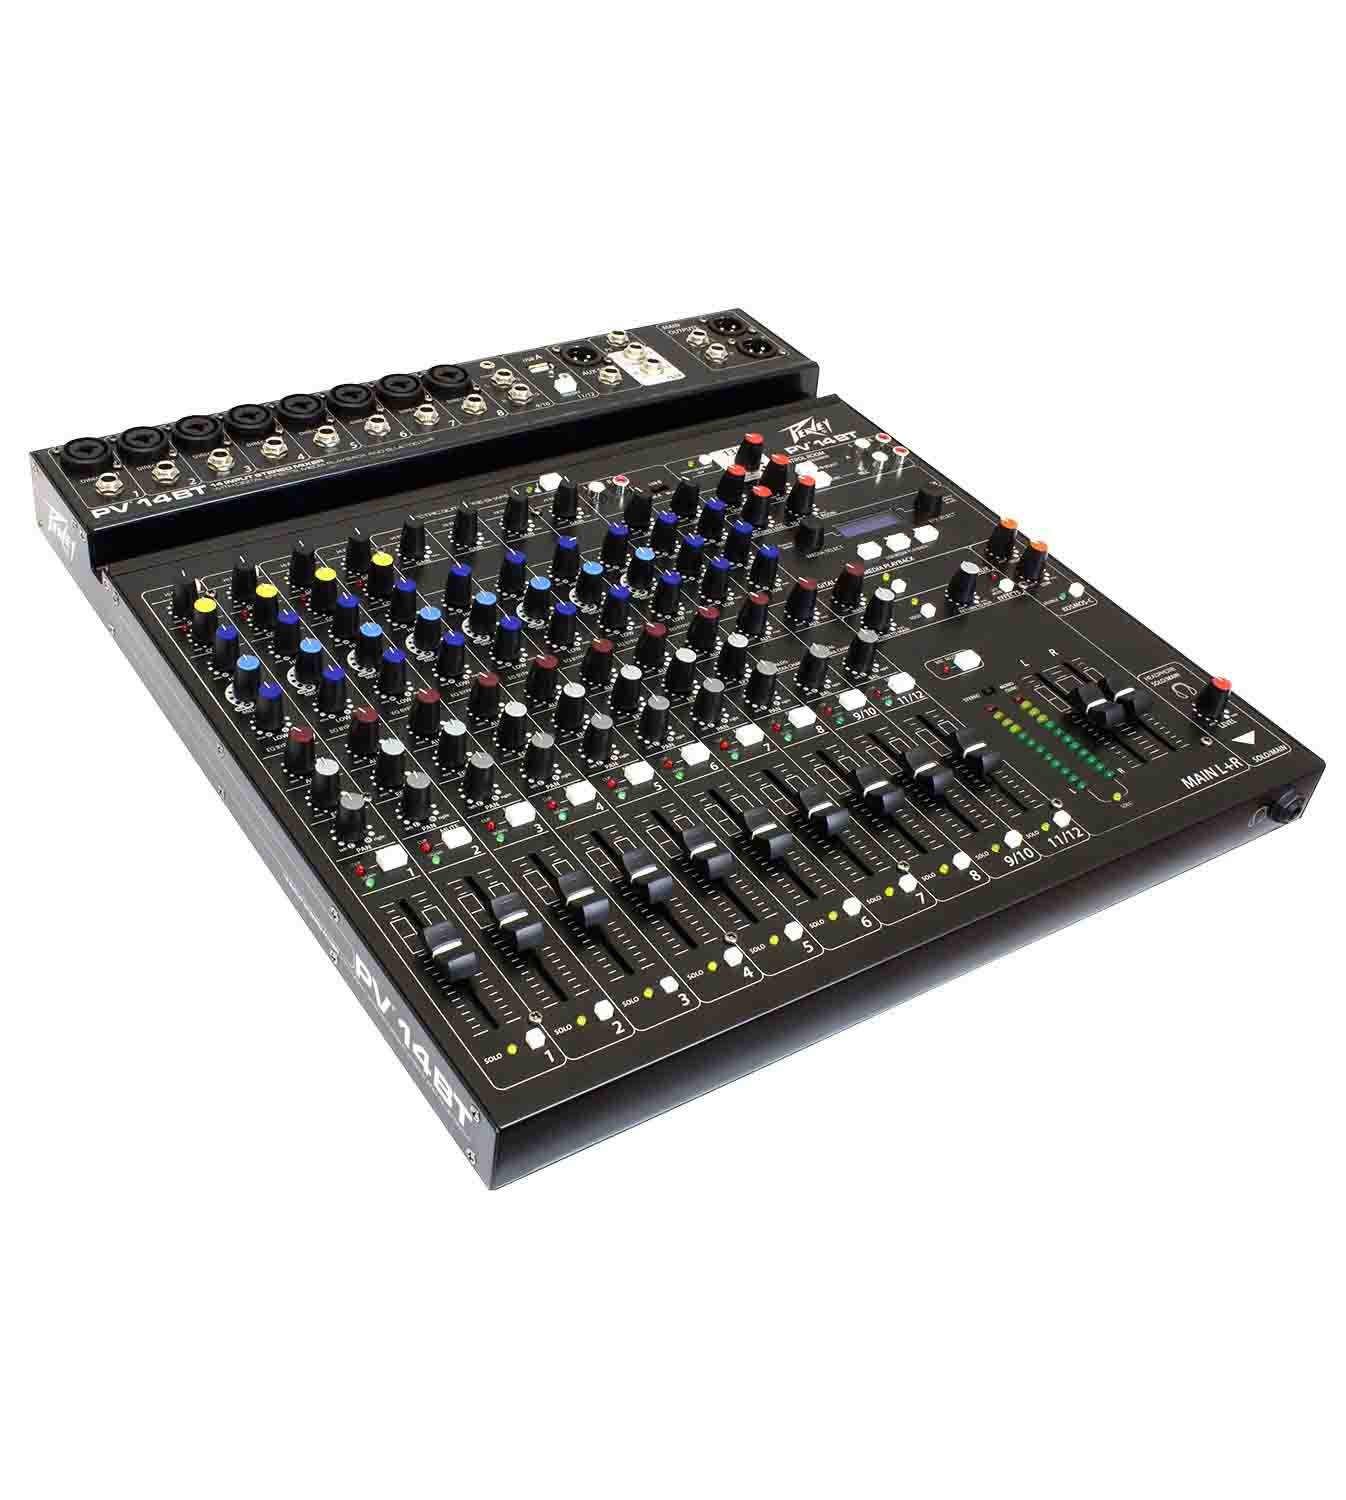 Open Box: Peavey PV 14 BT 120US Compact 14 Channel Mixer with Bluetooth - Hollywood DJ